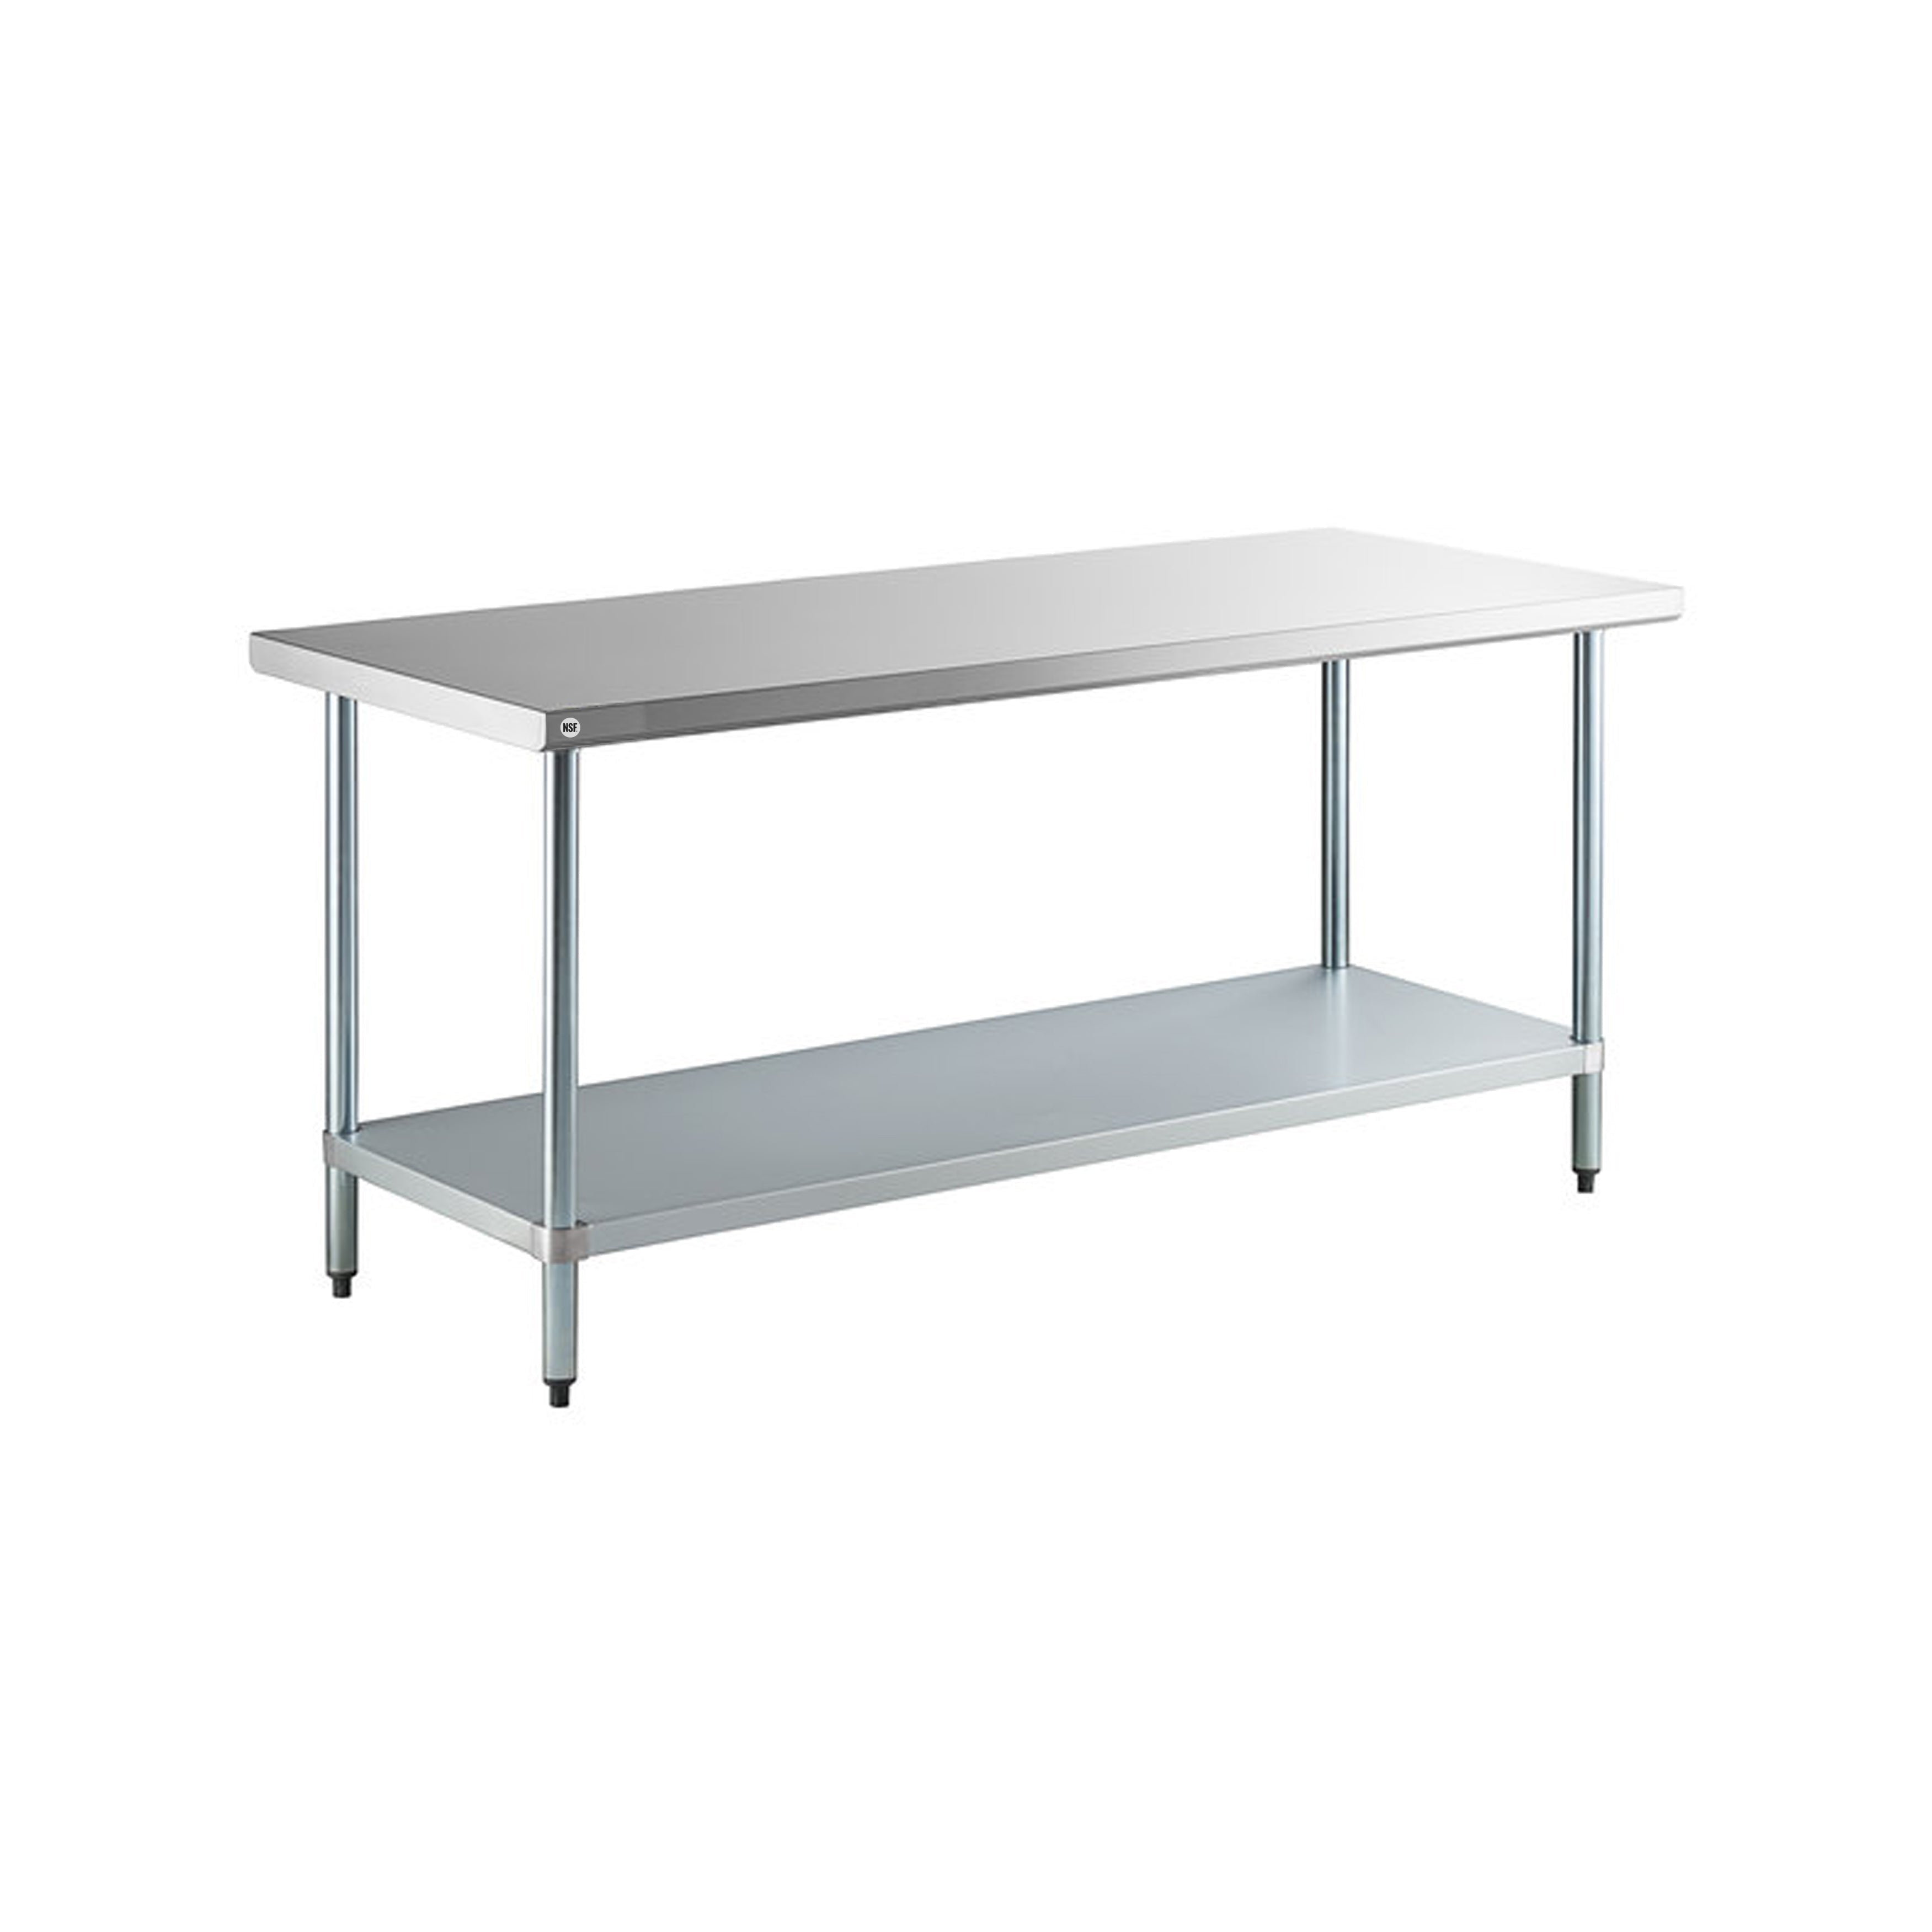 Omcan - 26044, Commercial 24" x 84" Stainless Steel Kitchen Work Table 1400lbs Heavy Duty